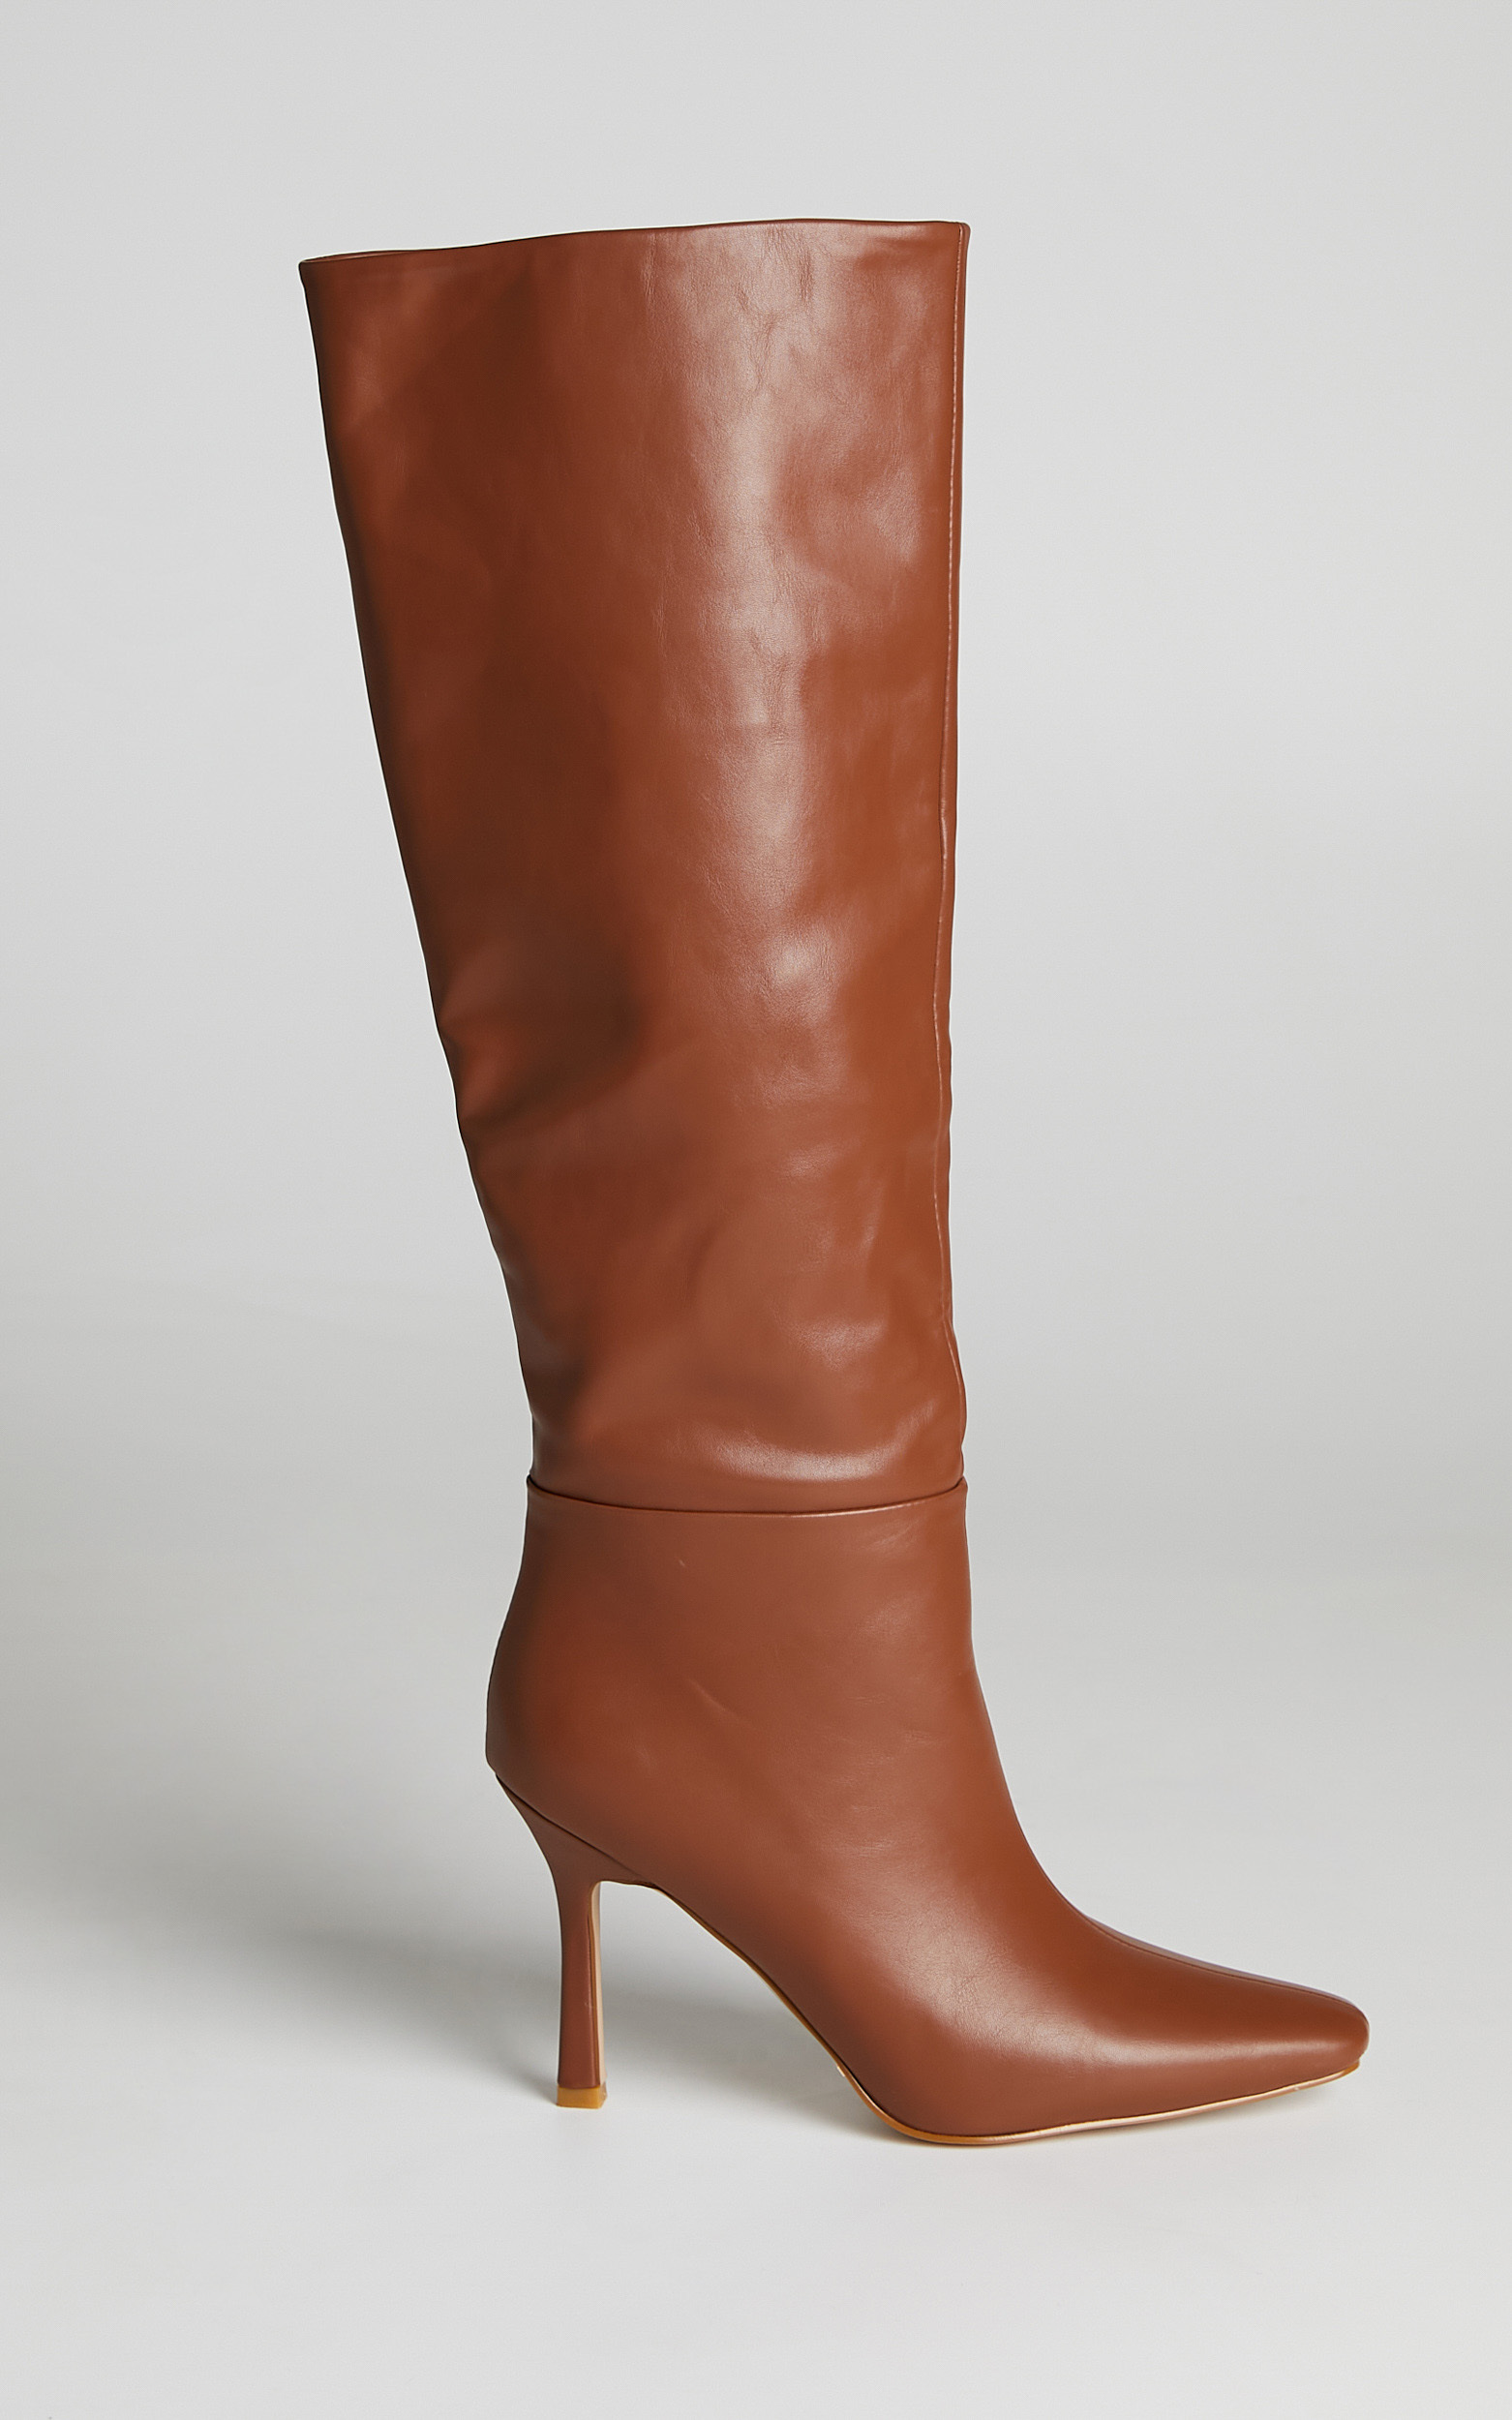 Billini - Whitaker Boots in Sepia - 05, BRN2, hi-res image number null